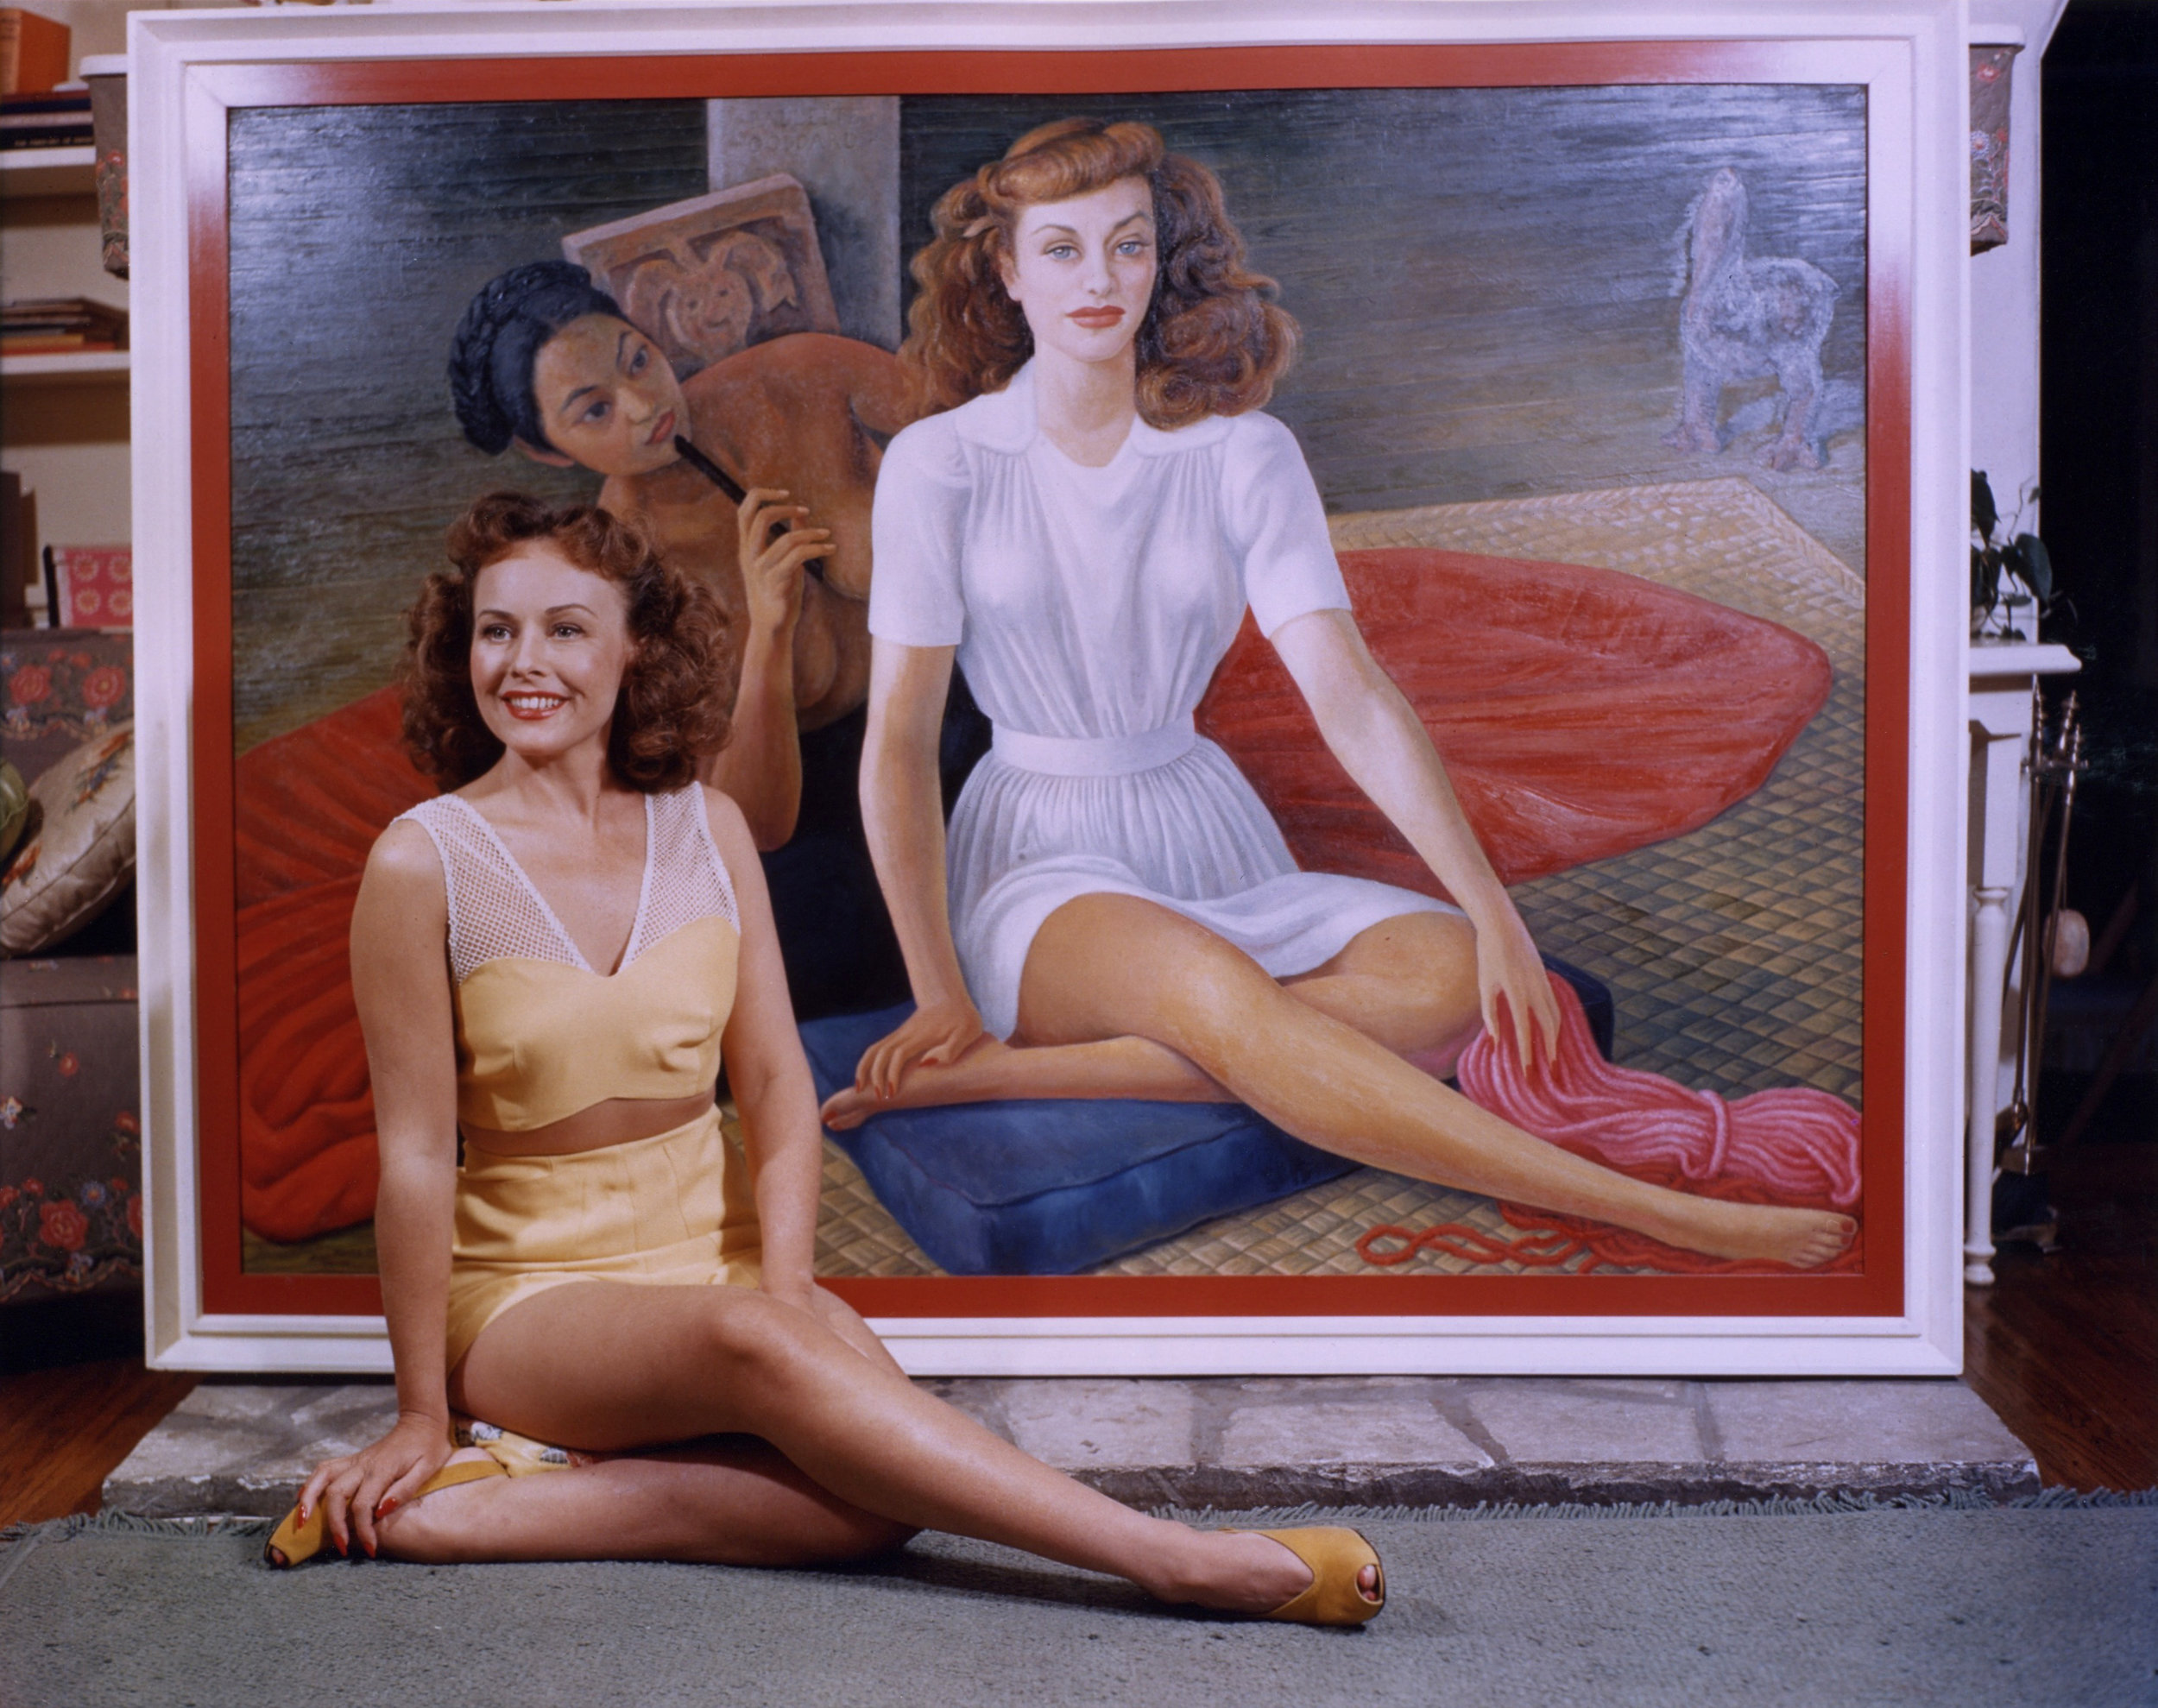 Paulette Goddard with Diego Rivera's portrait of her, executed 1940-41